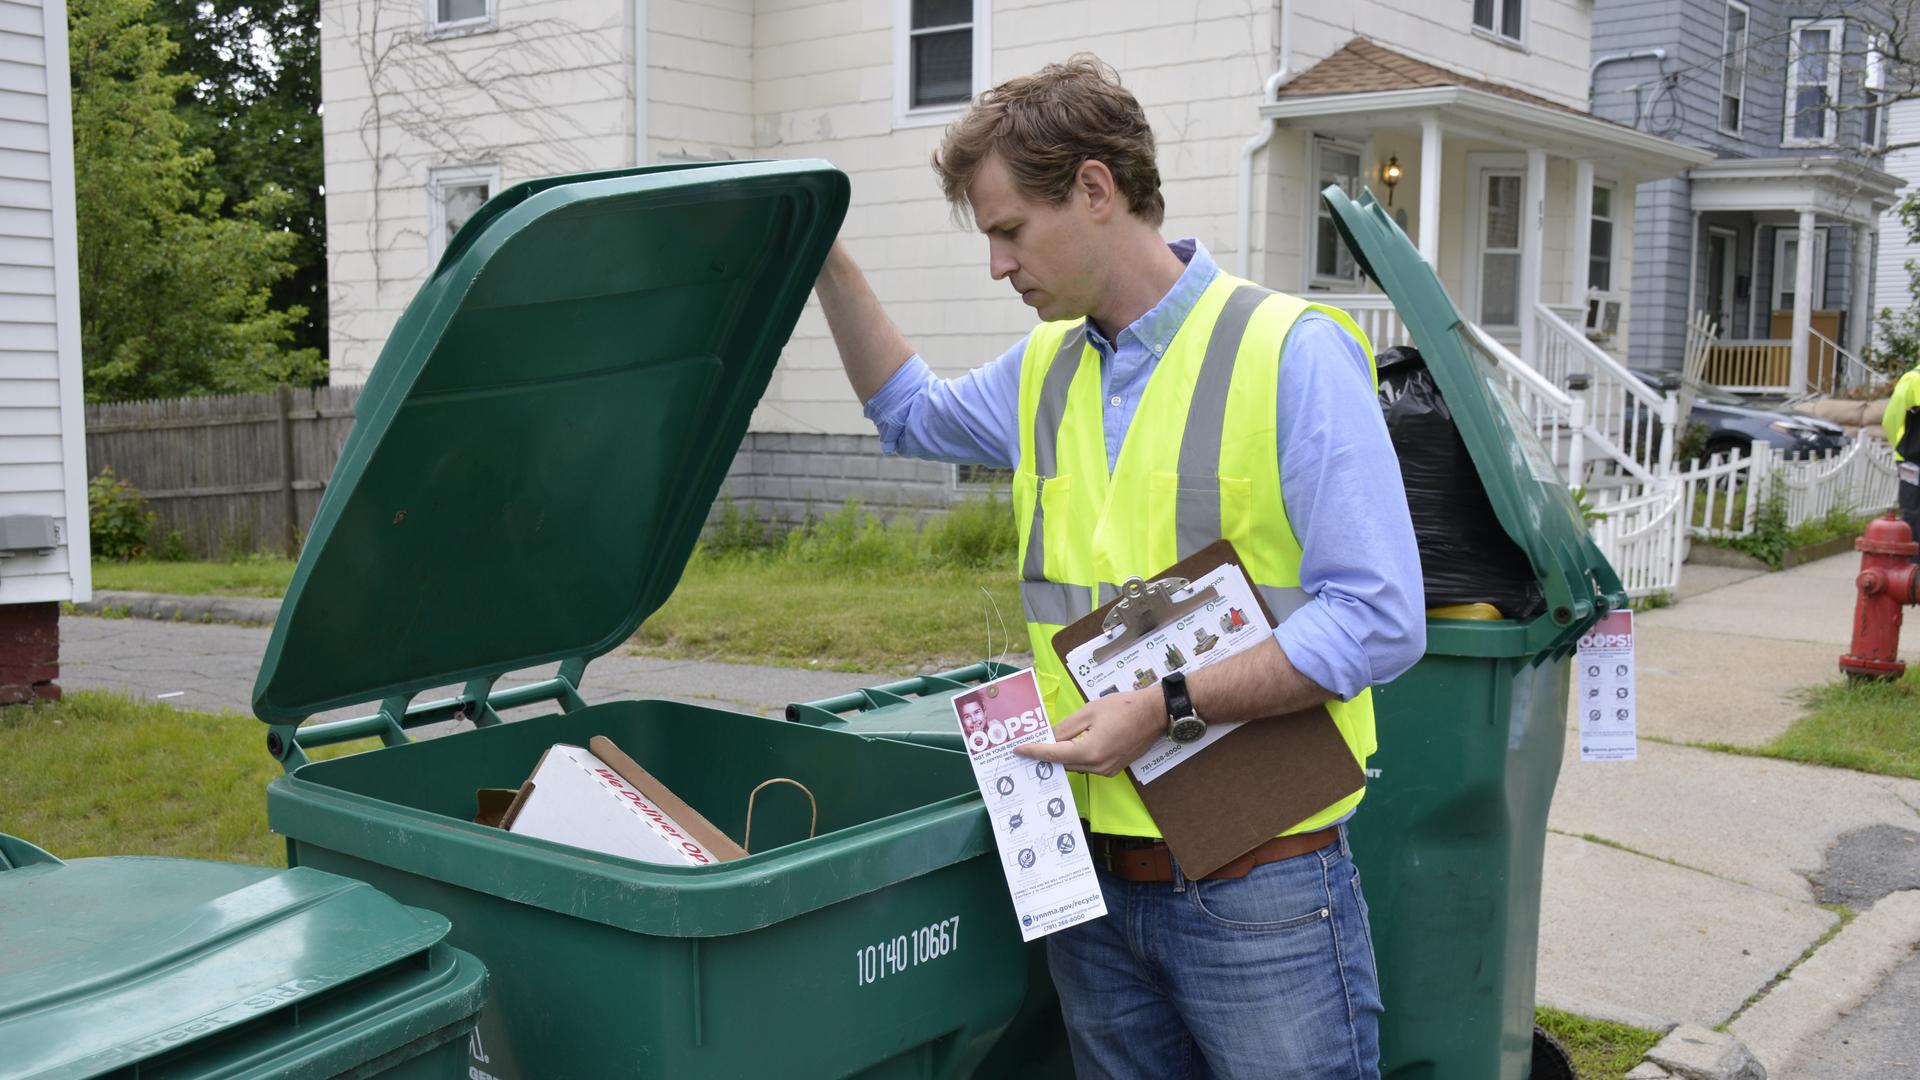 Cody Marshall, with The Recycling Partnership, looks through a recycling bin in Lynn, Massachusetts. His organization is working with cities across the nation, helping them educate residents on how to recycle better.